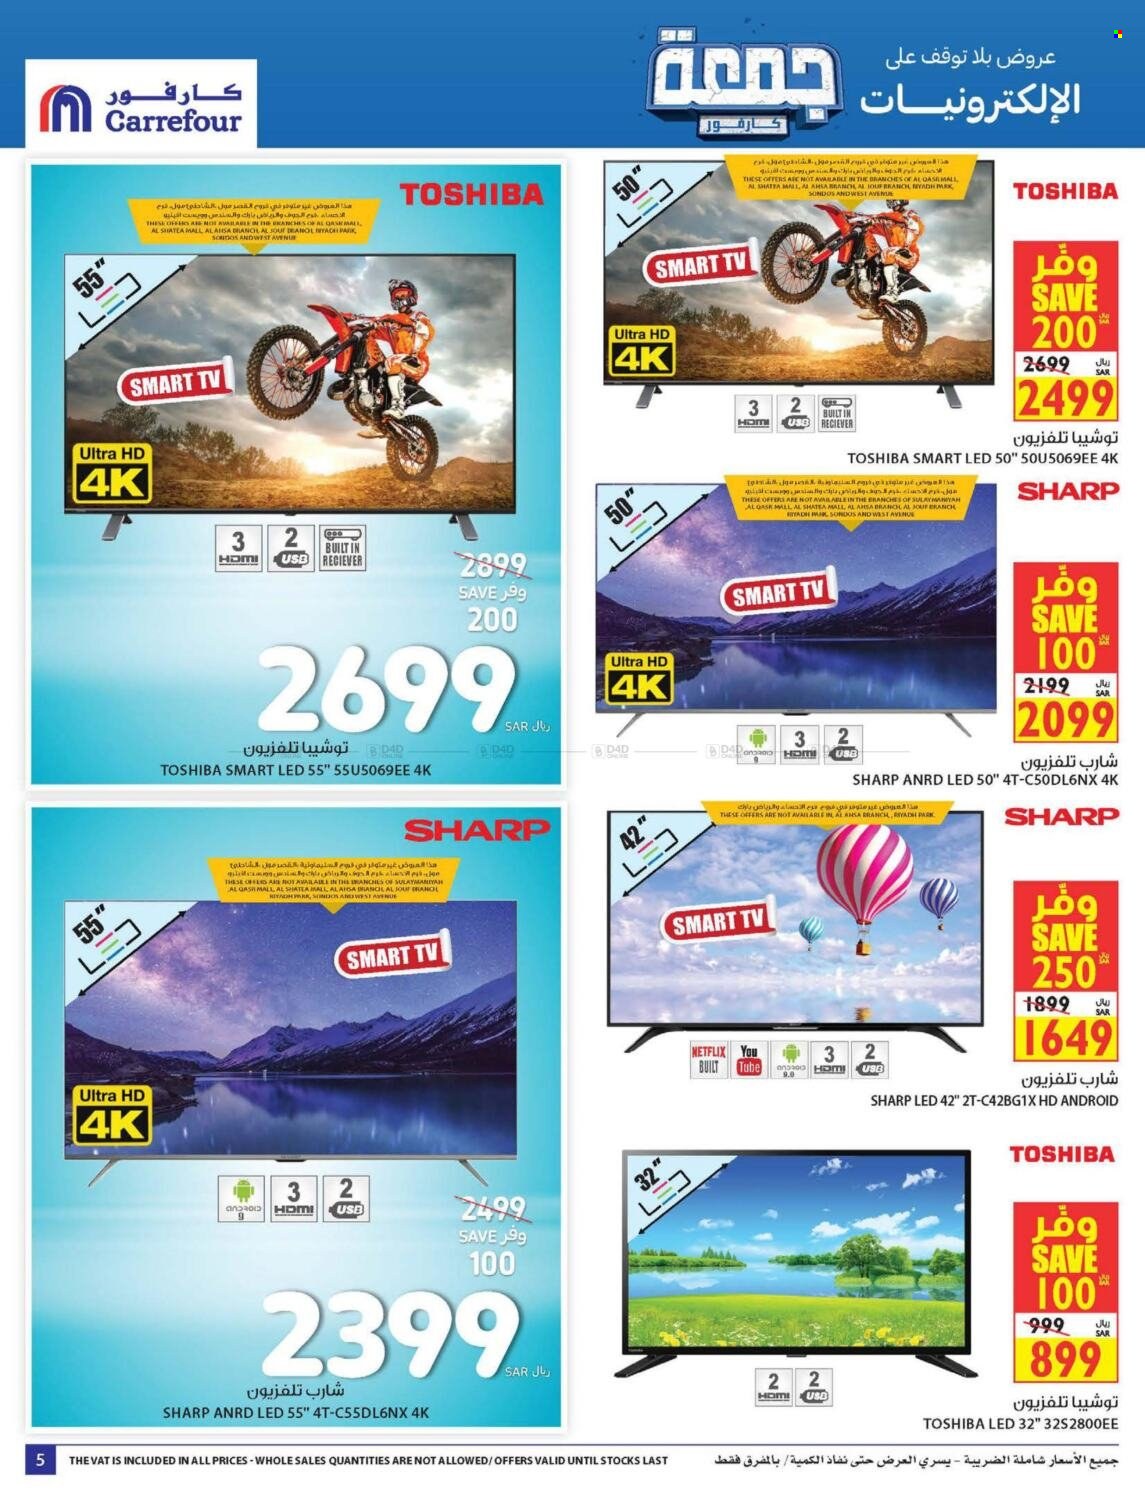 Carrefour flyer  - 10.28.2021 - 11.23.2021. Page 5.